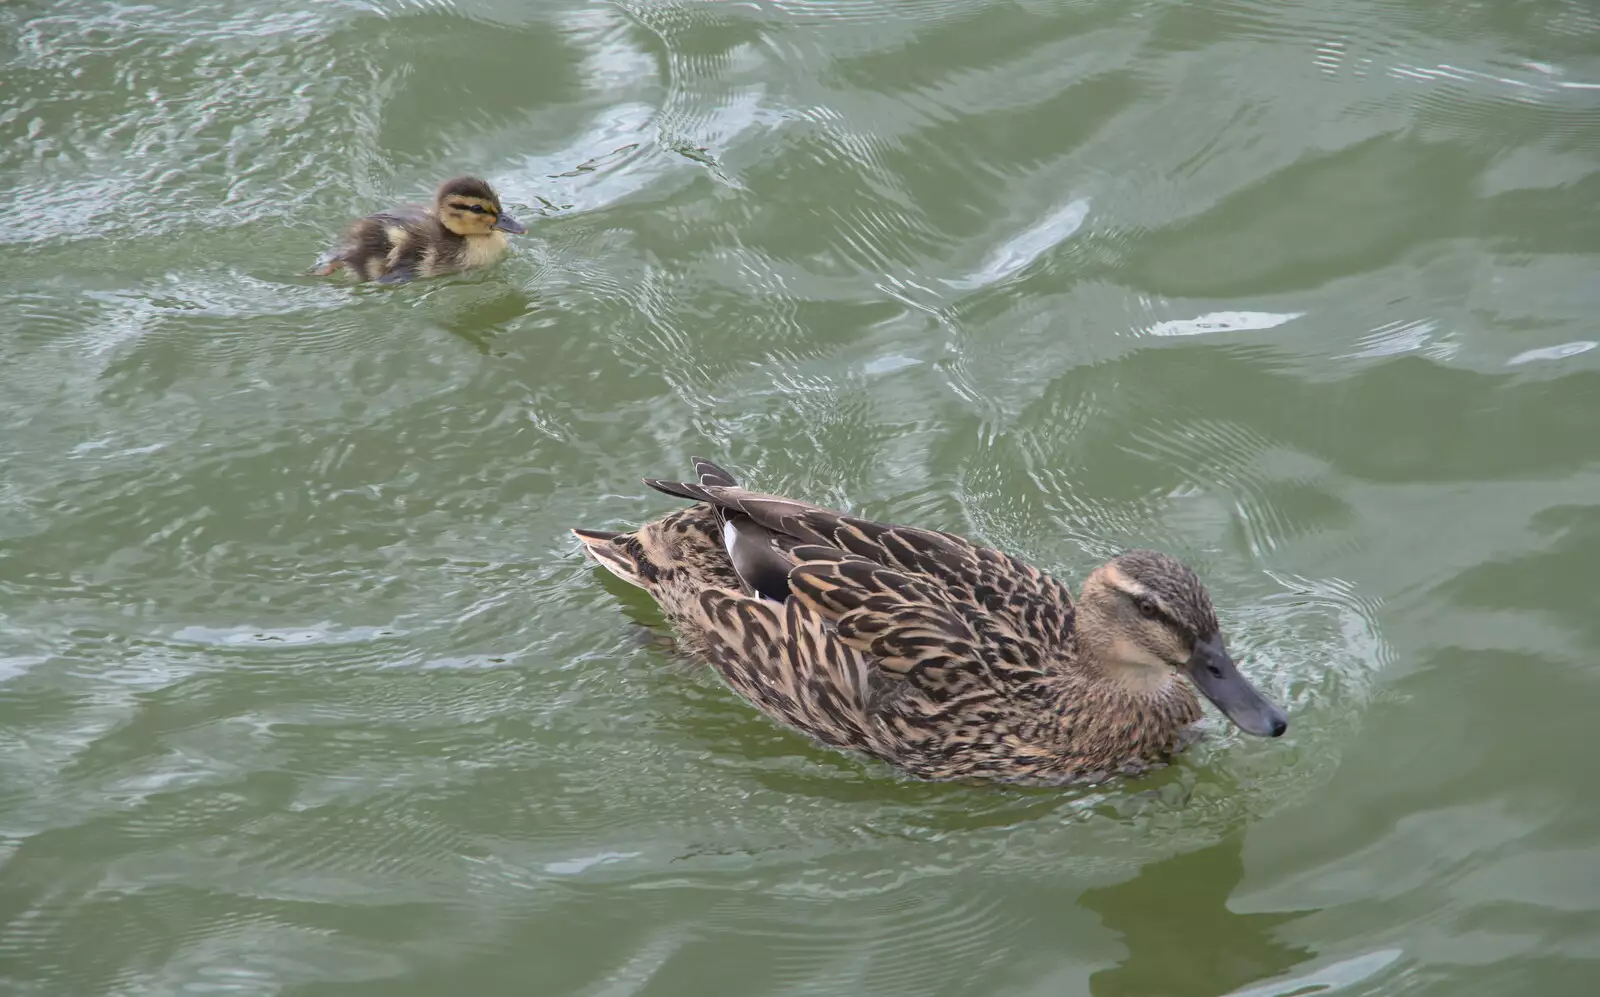 A fluffy duckling pootles after its mother, from The Lost Pubs of Diss, Norfolk - 26th April 2023